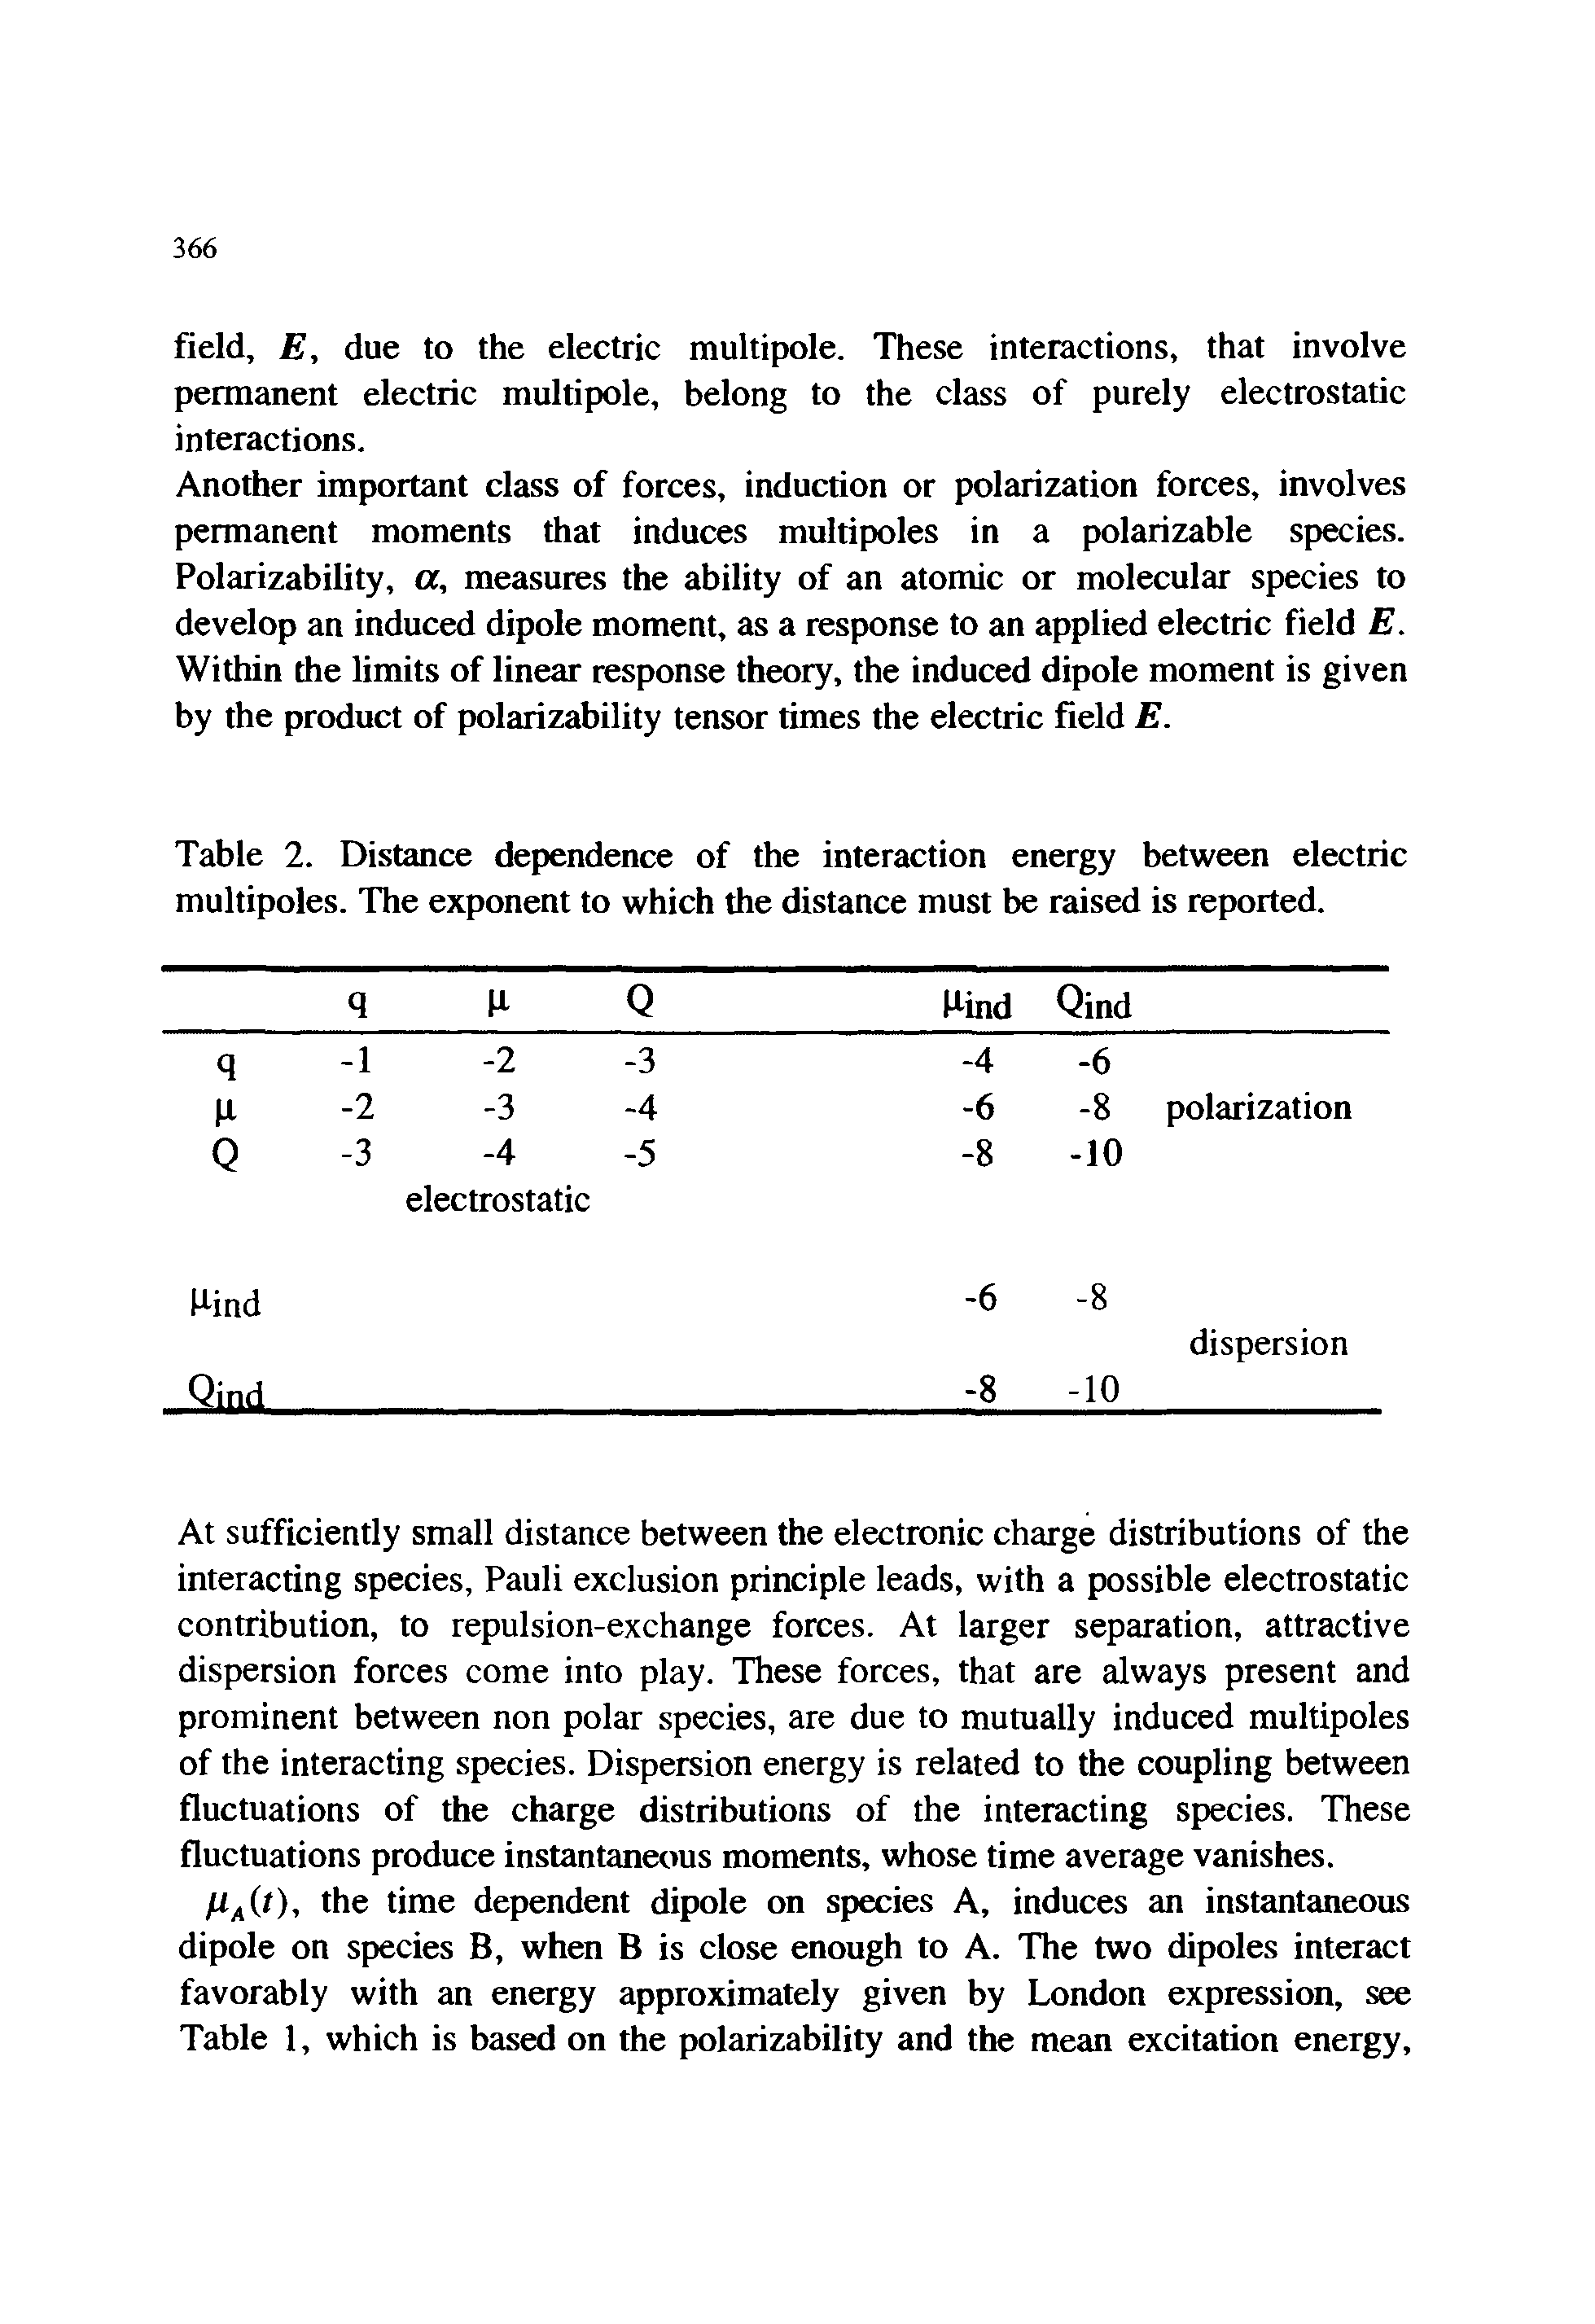 Table 2. Distance dependence of the interaction energy between electric multipoles. The exponent to which the distance must be raised is reported.